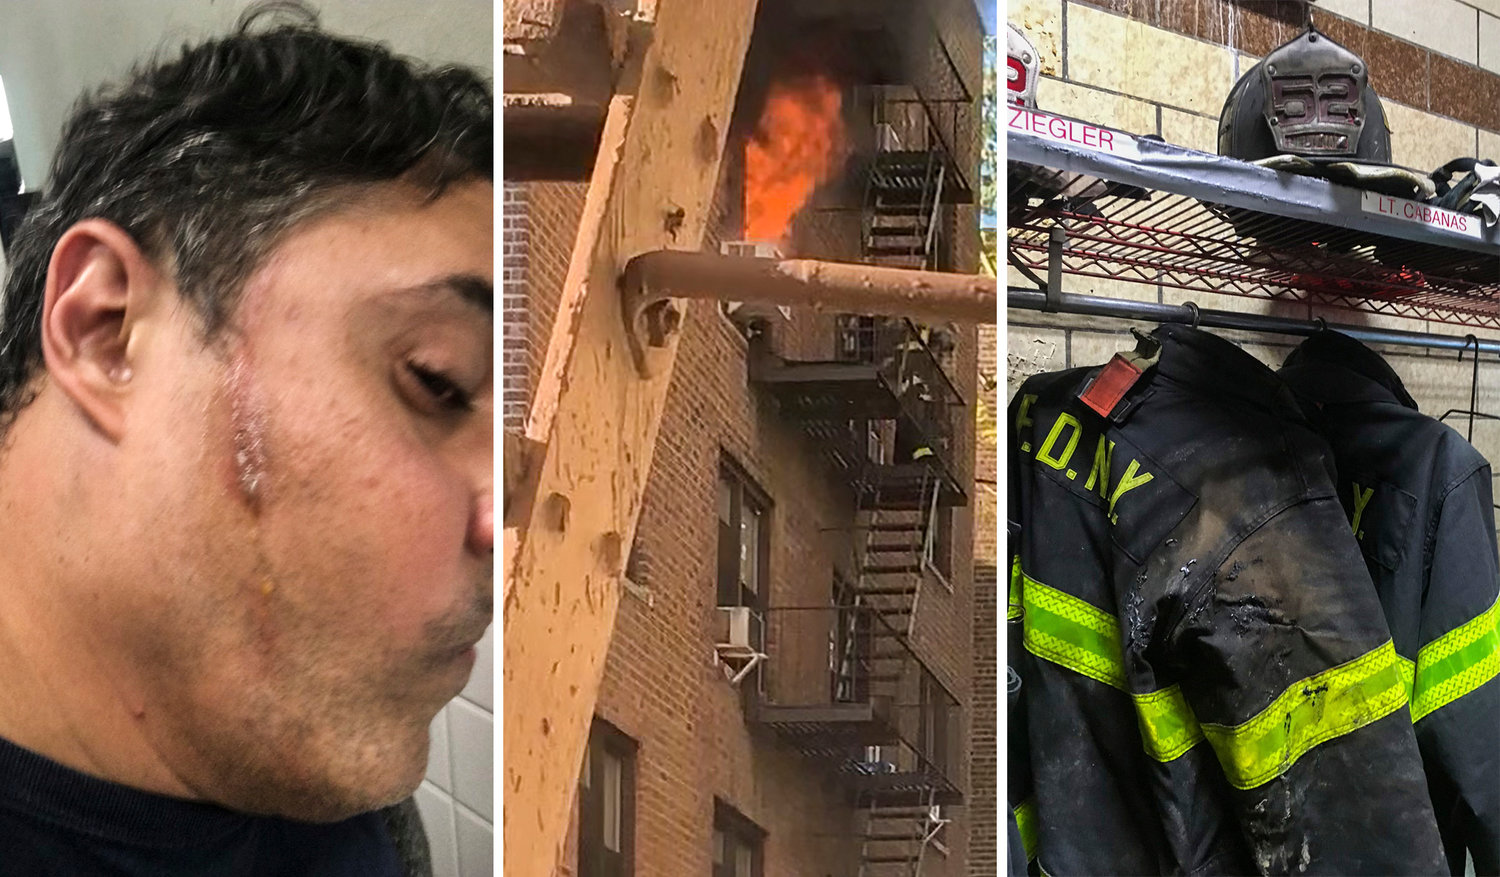 When Ladder 52 responded to a fire on the sixth floor of an apartment building on West 240th Street on Nov. 4, 2019, Lt. Gilbert Cabanas ran inside and saved a woman’s life. He suffered second-degree burns to his face and hands in the process, sending him to the hospital. As soon as he was discharged, he hugged his kids.